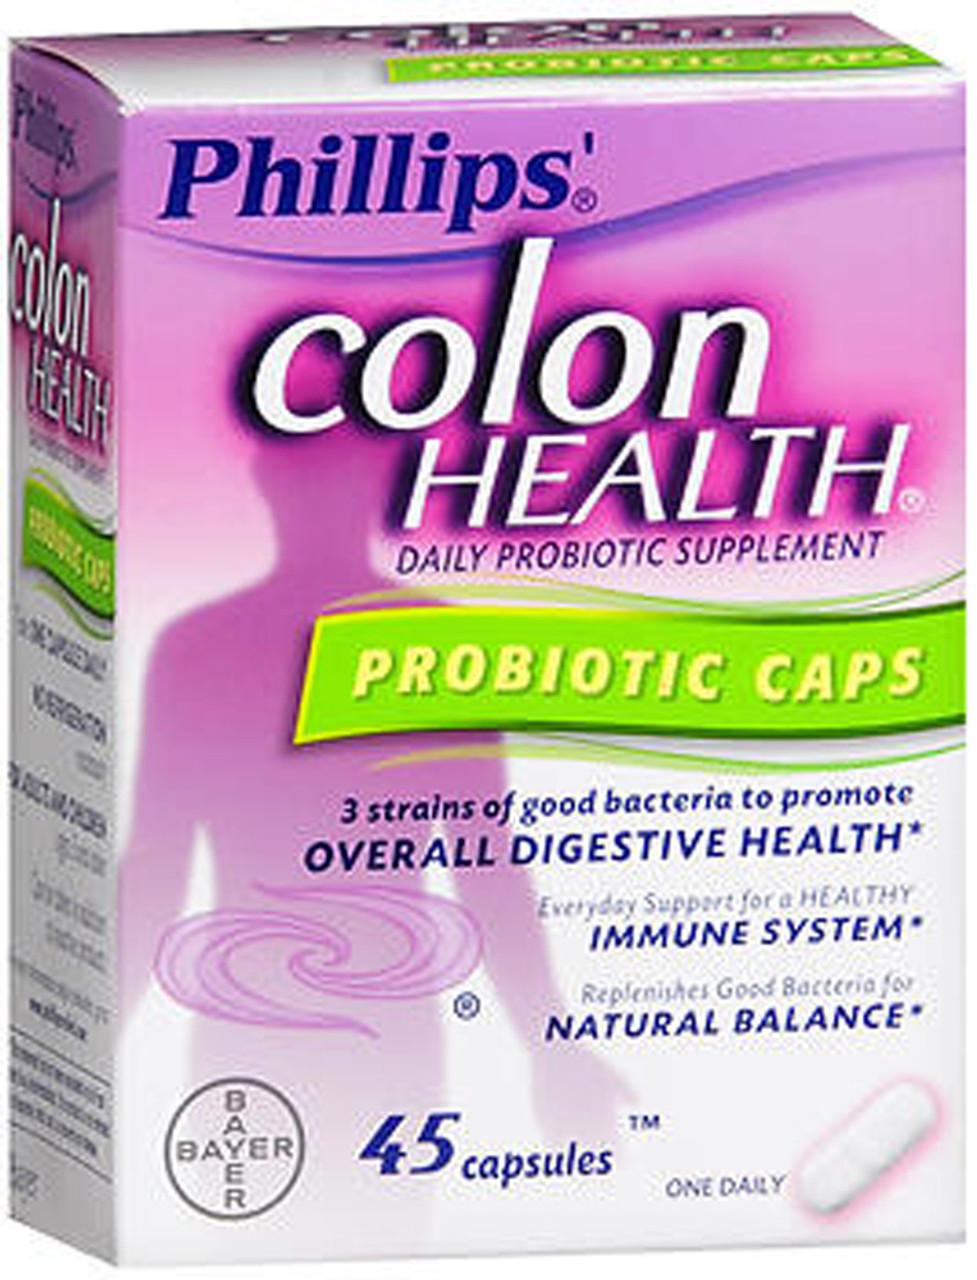 is-phillips-colon-health-good-for-ibs